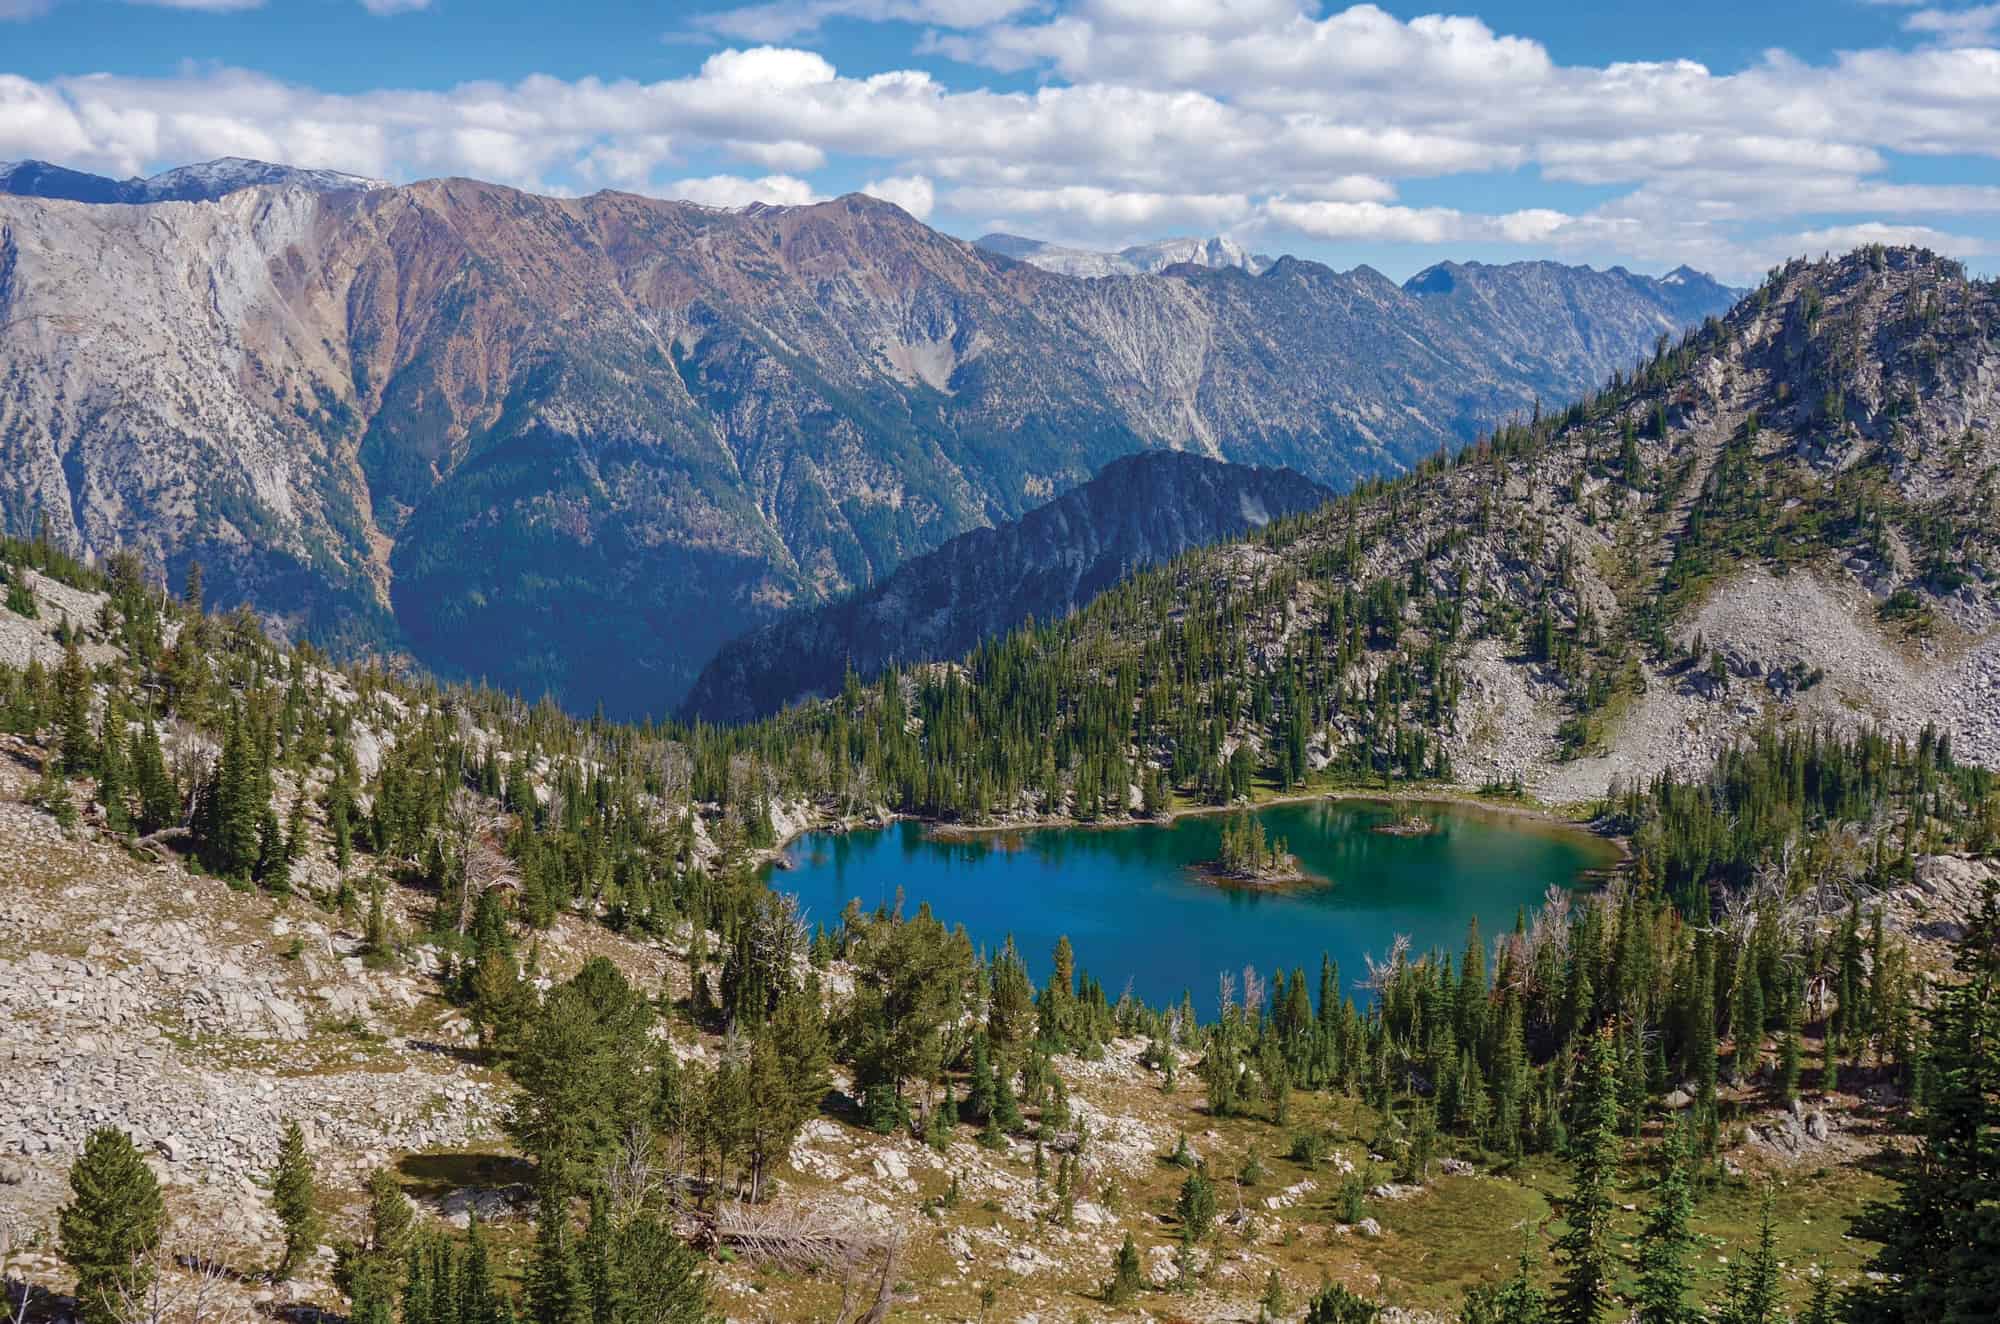 After a long, steady climb, hikers are rewarded with stunning views of the Wallowas and Chimney Lake.